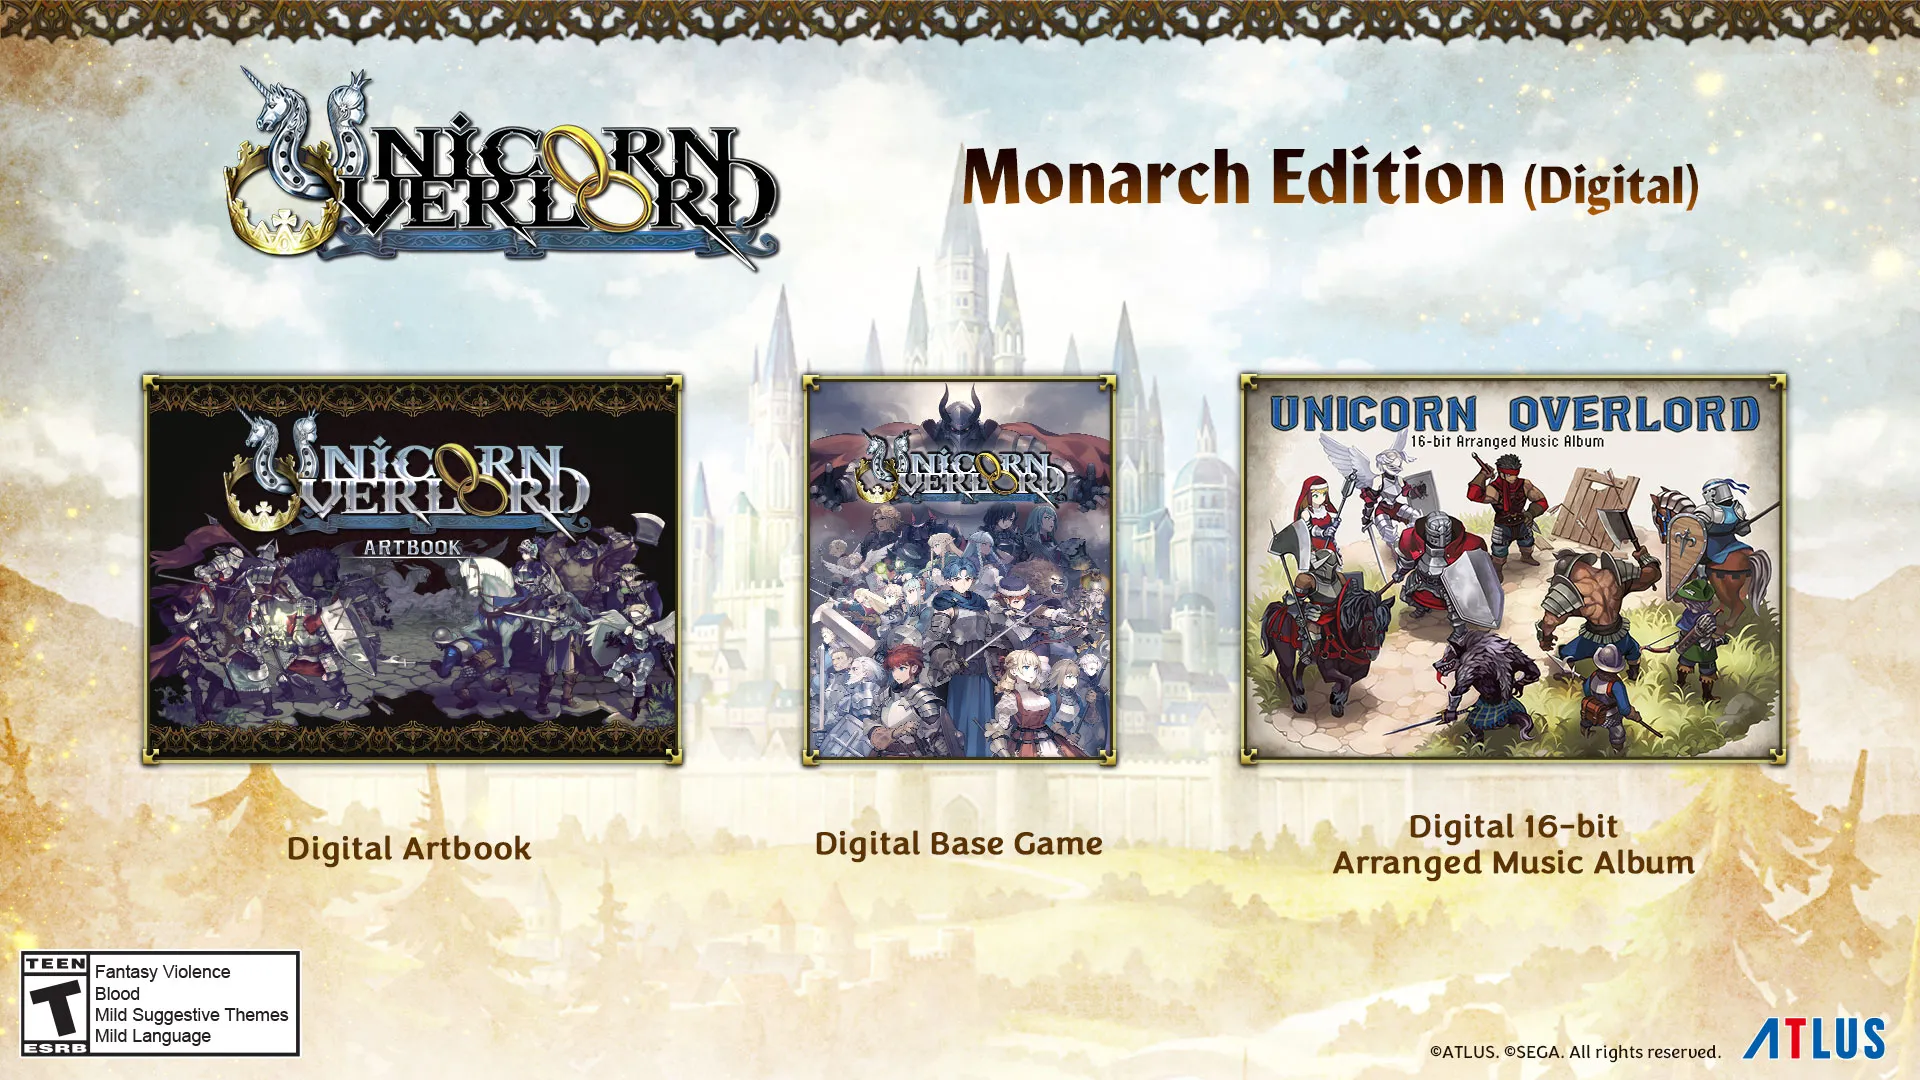 A promotional image for the Monarch Edition of Unicorn Overlord.